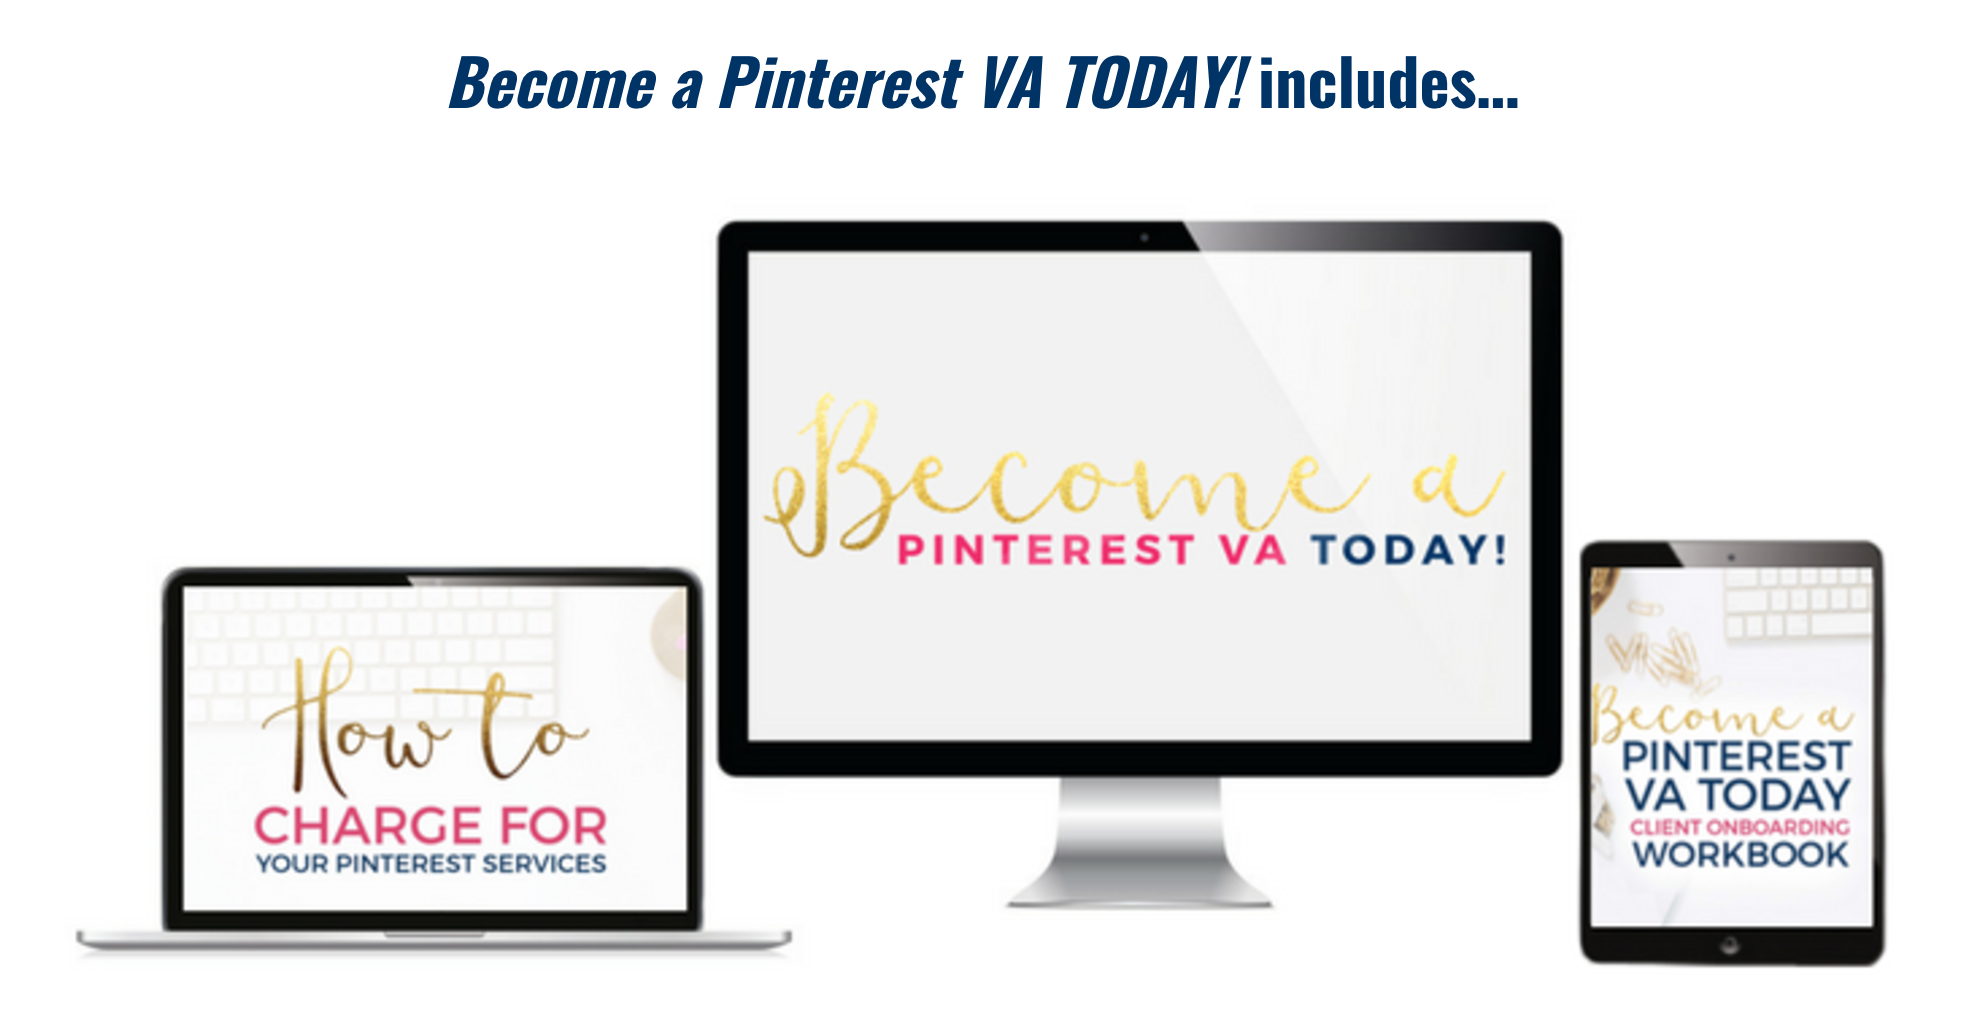 Become a Pinterest VA today!